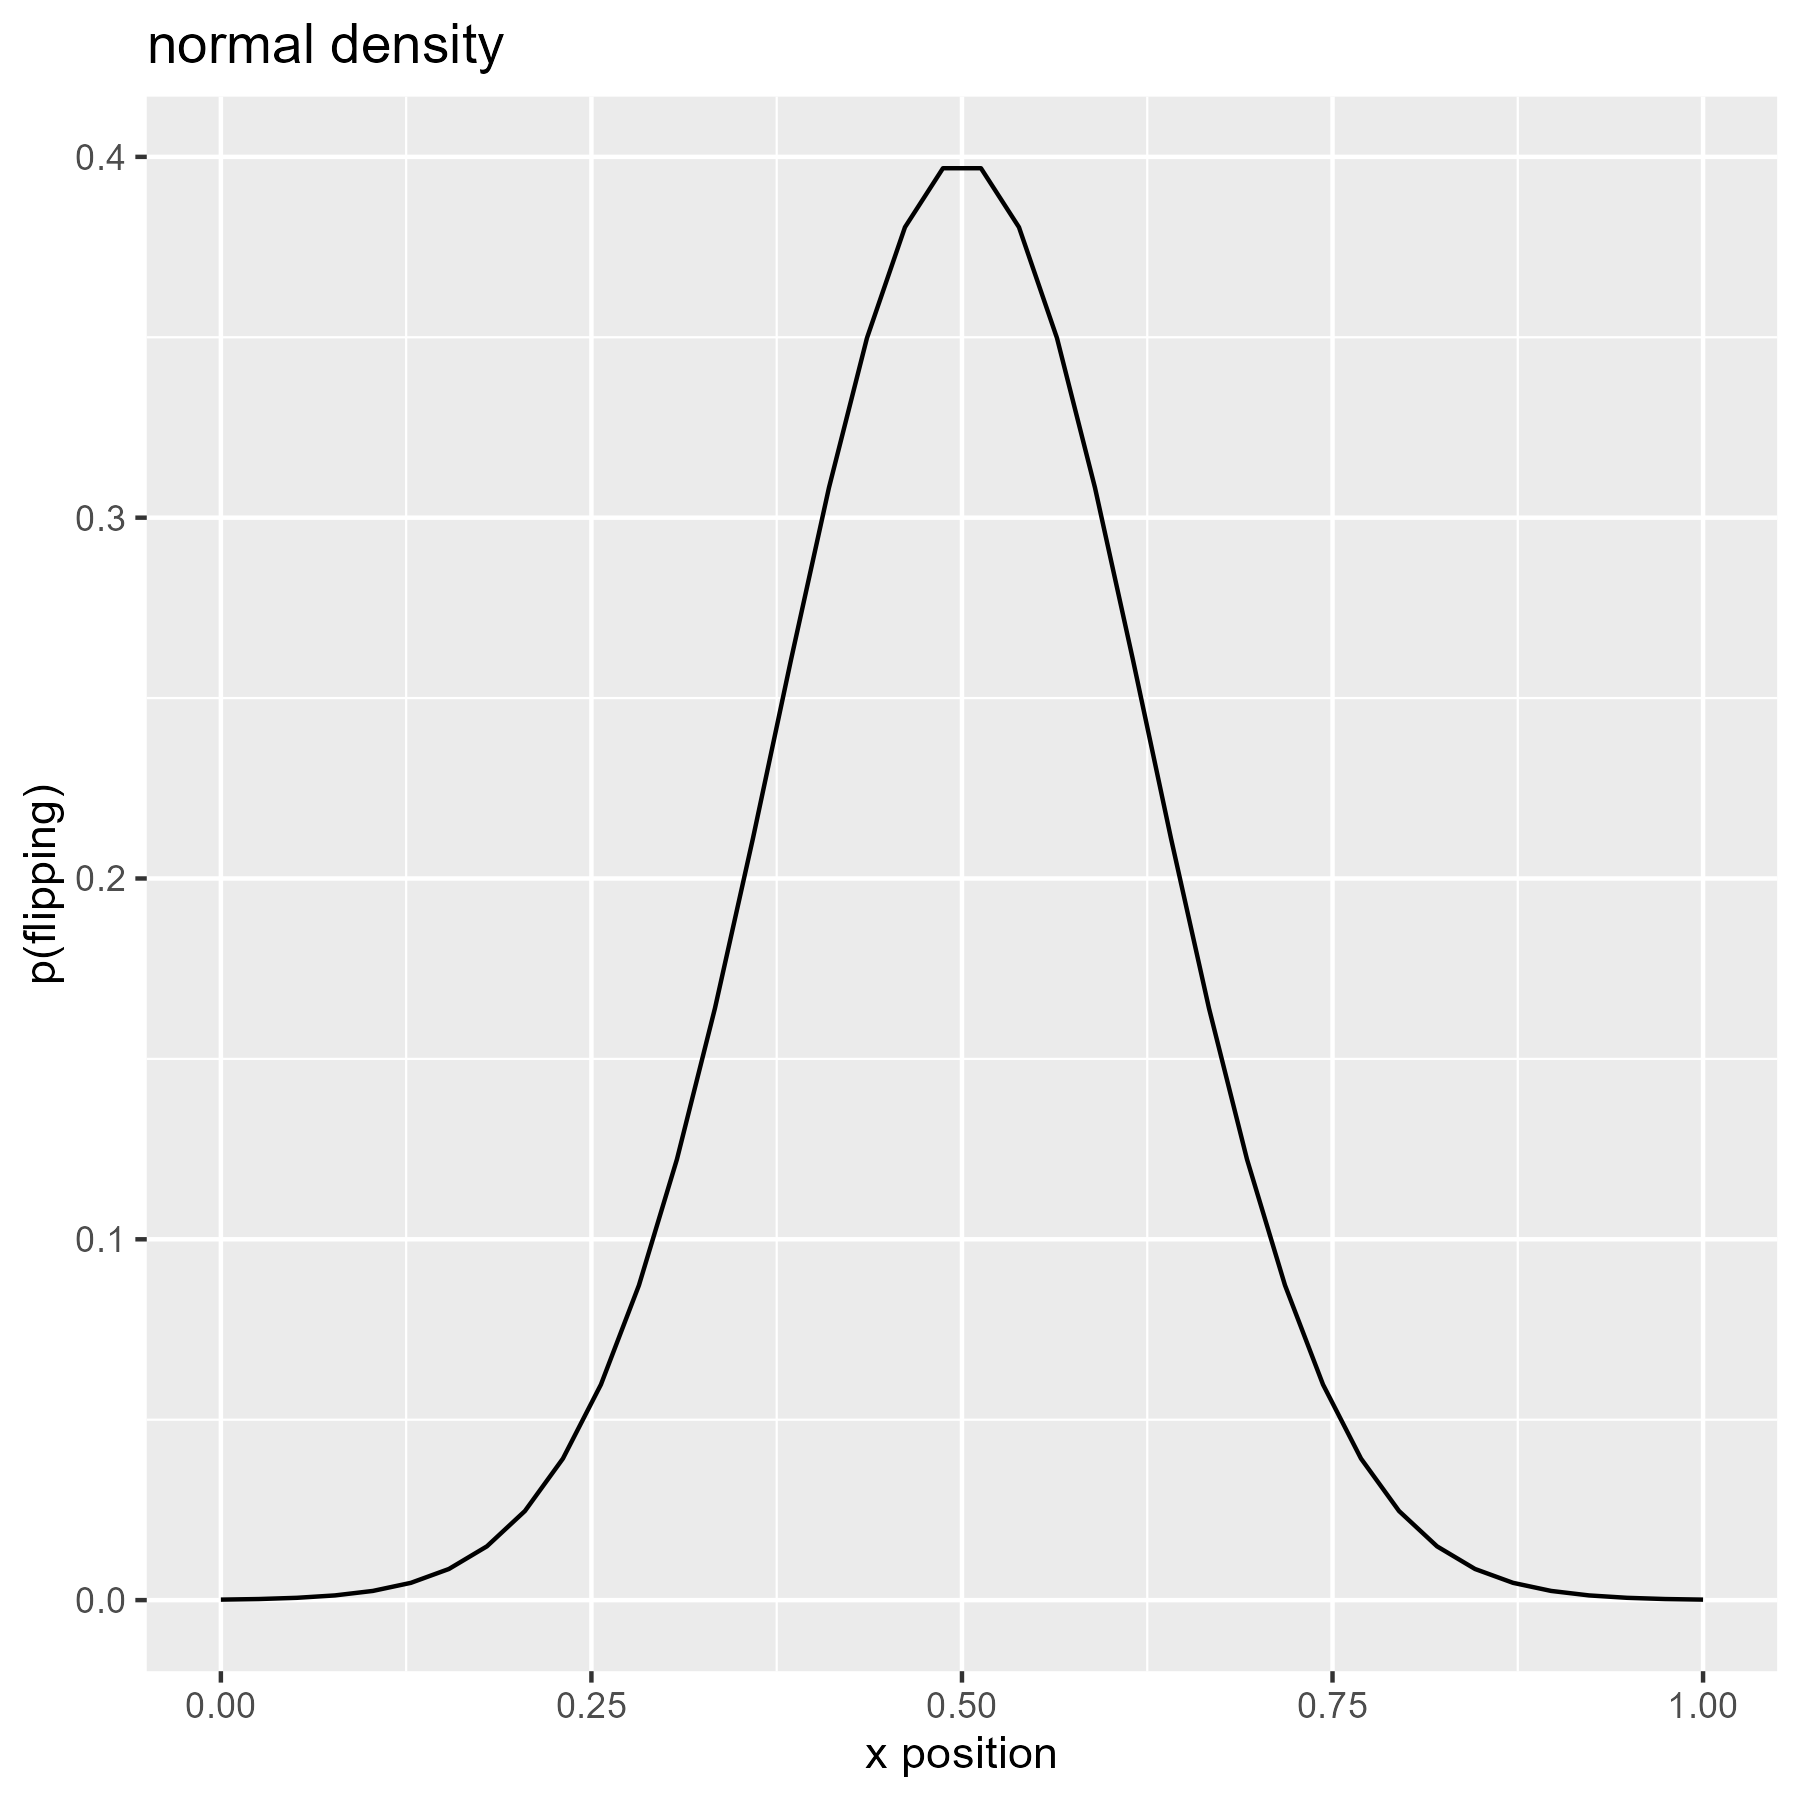 Density of the normal distribution